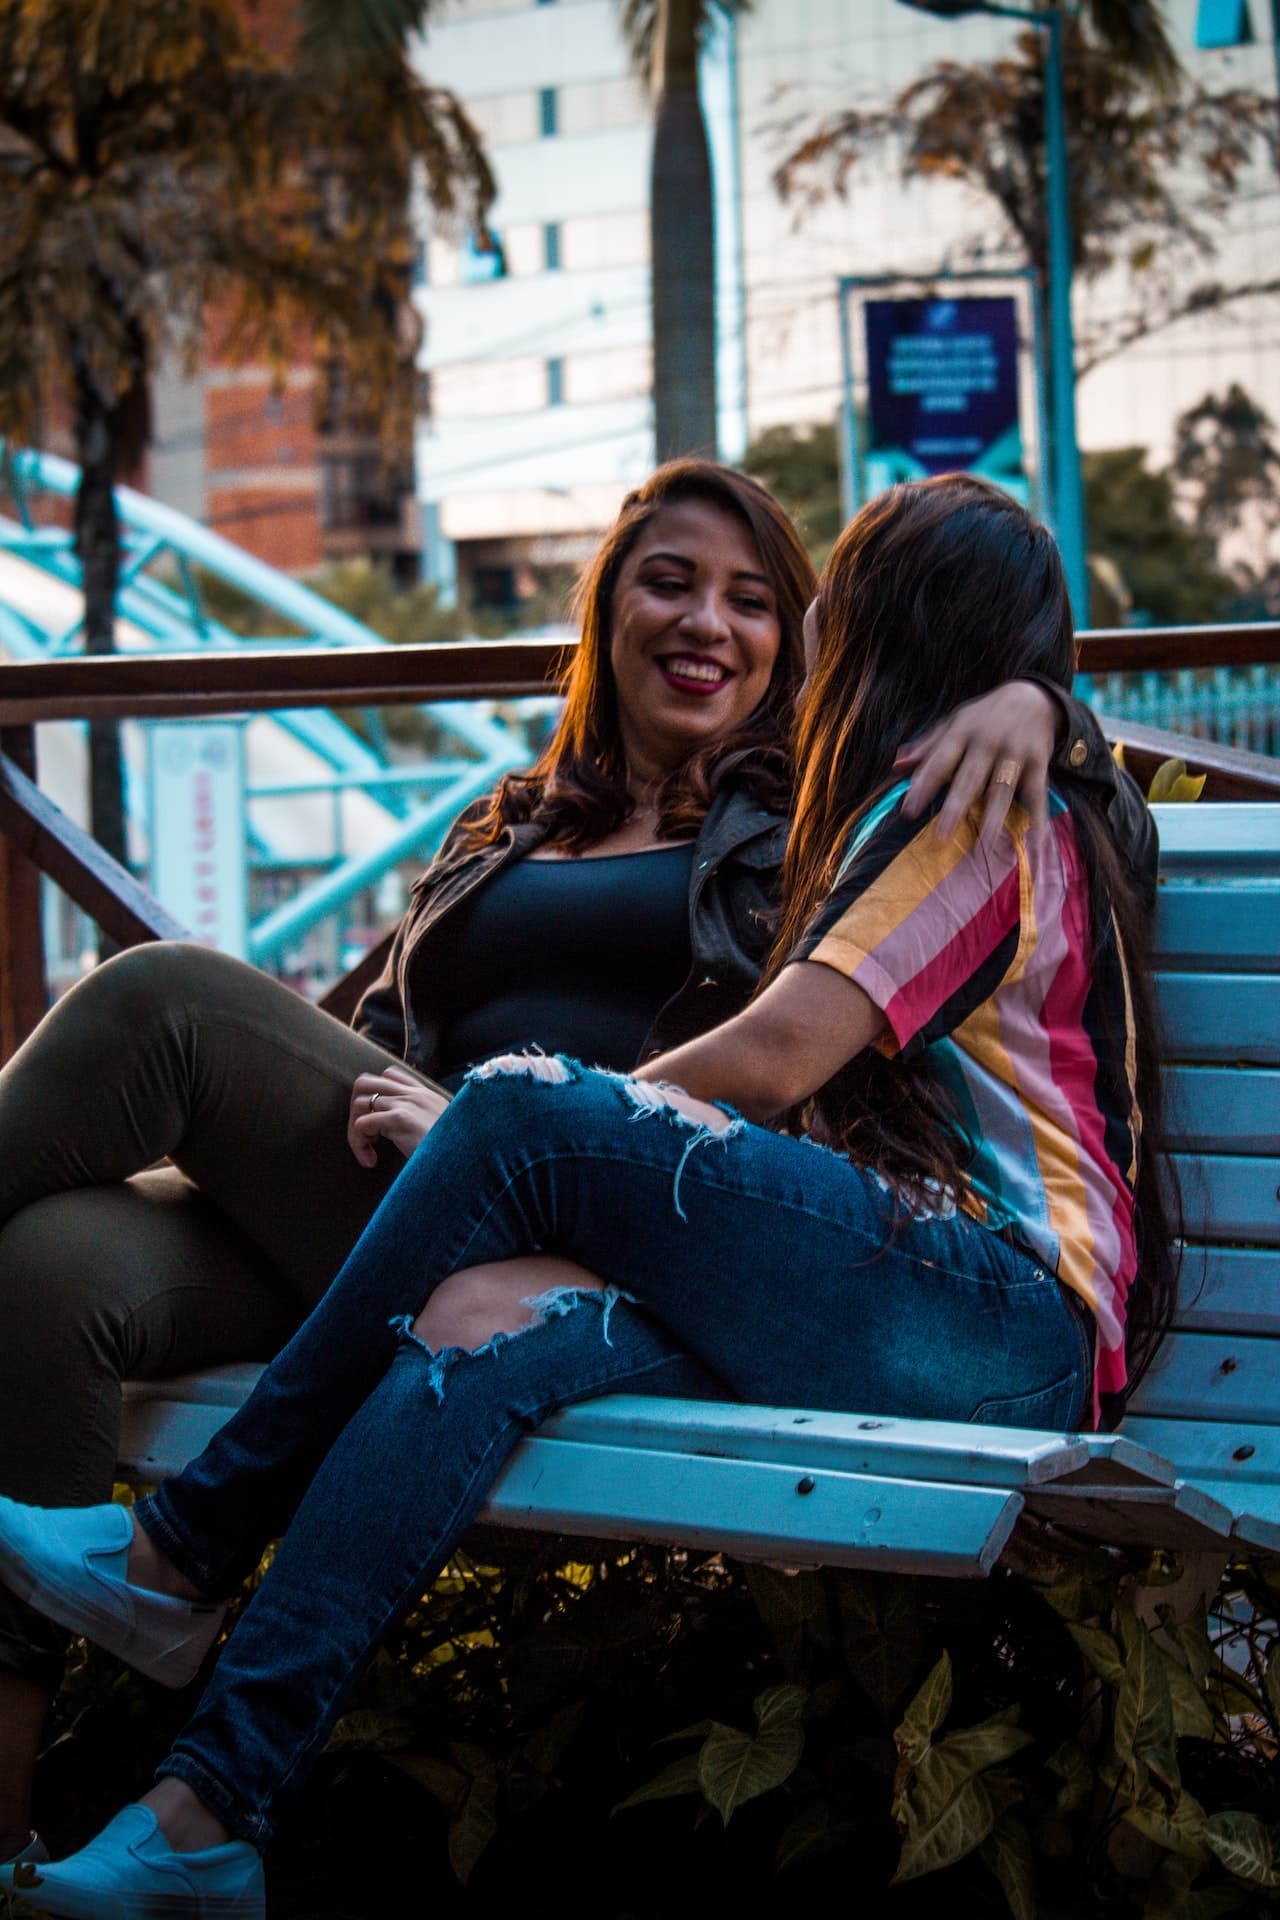 A queer couple relaxed hanging out on a park bench around sunset